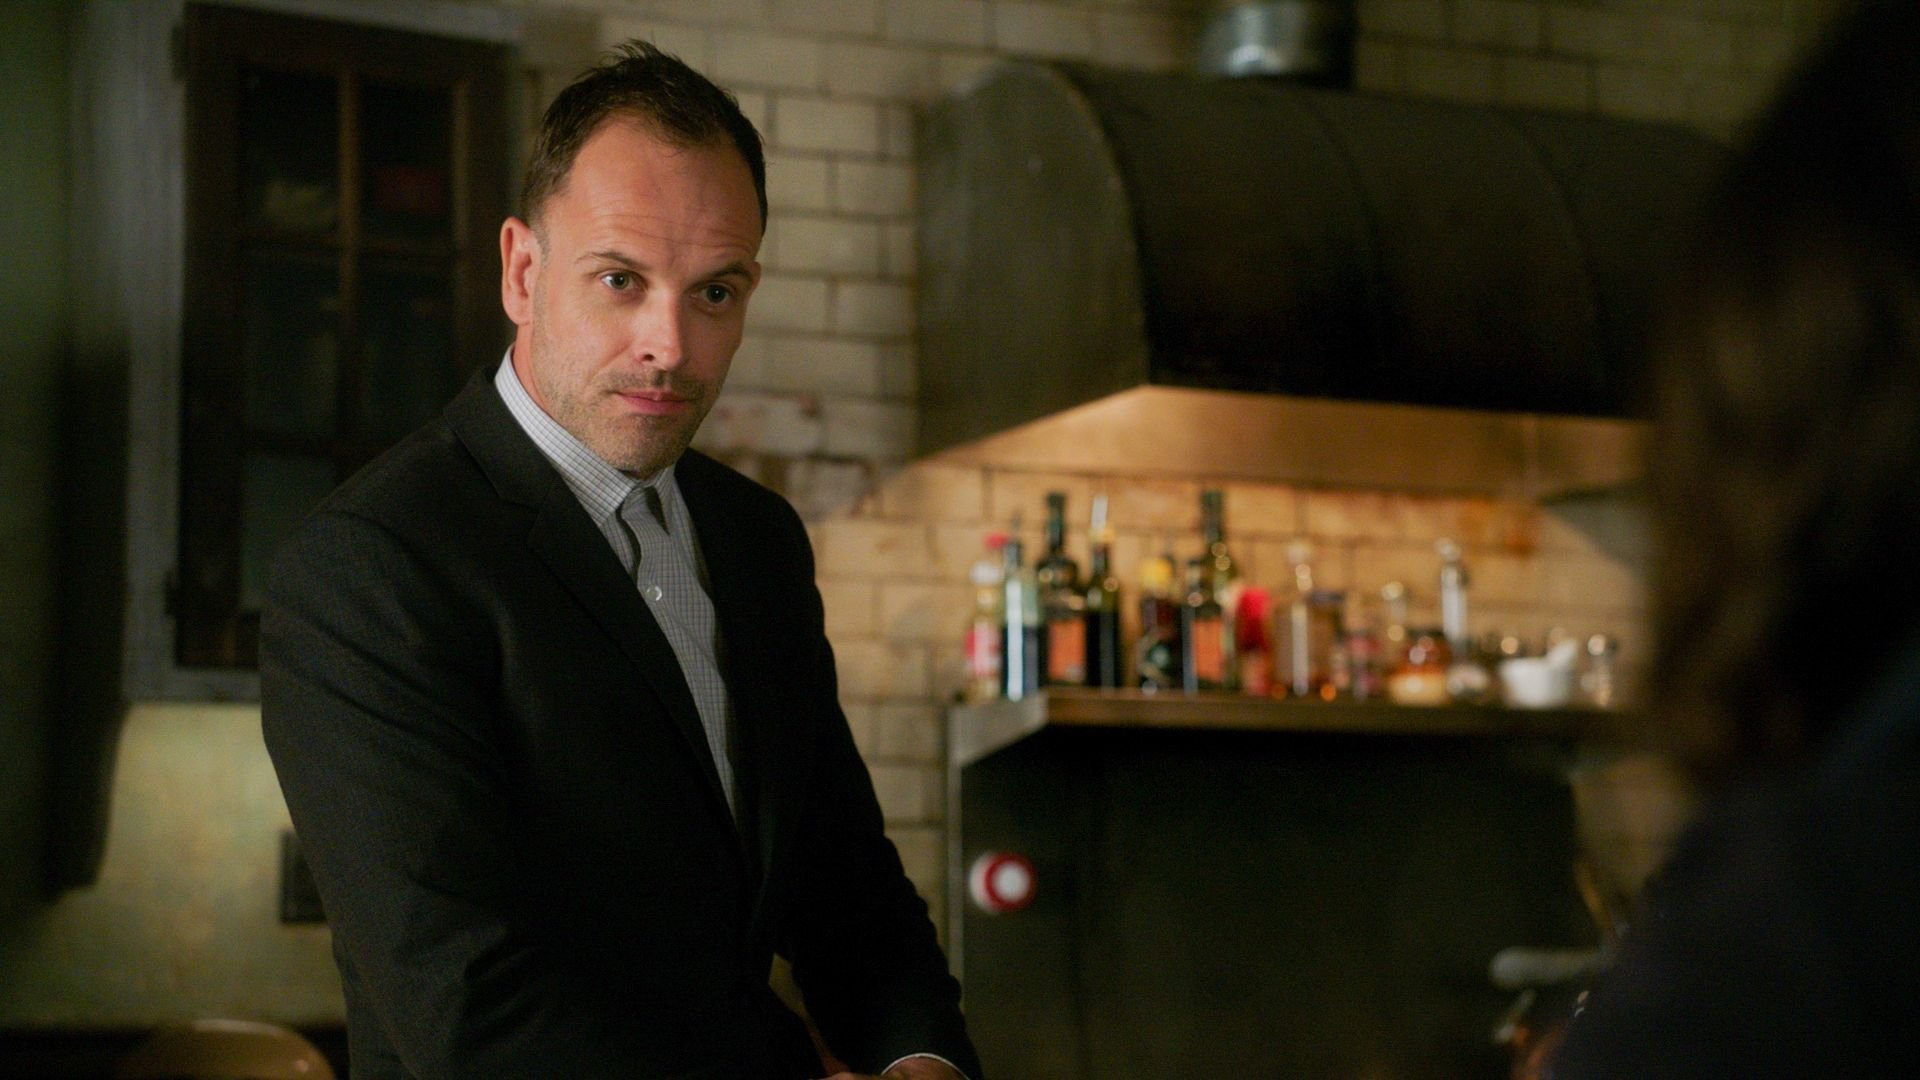 Jonny Lee Miller on the set of "Elementary" | Source: Getty Images